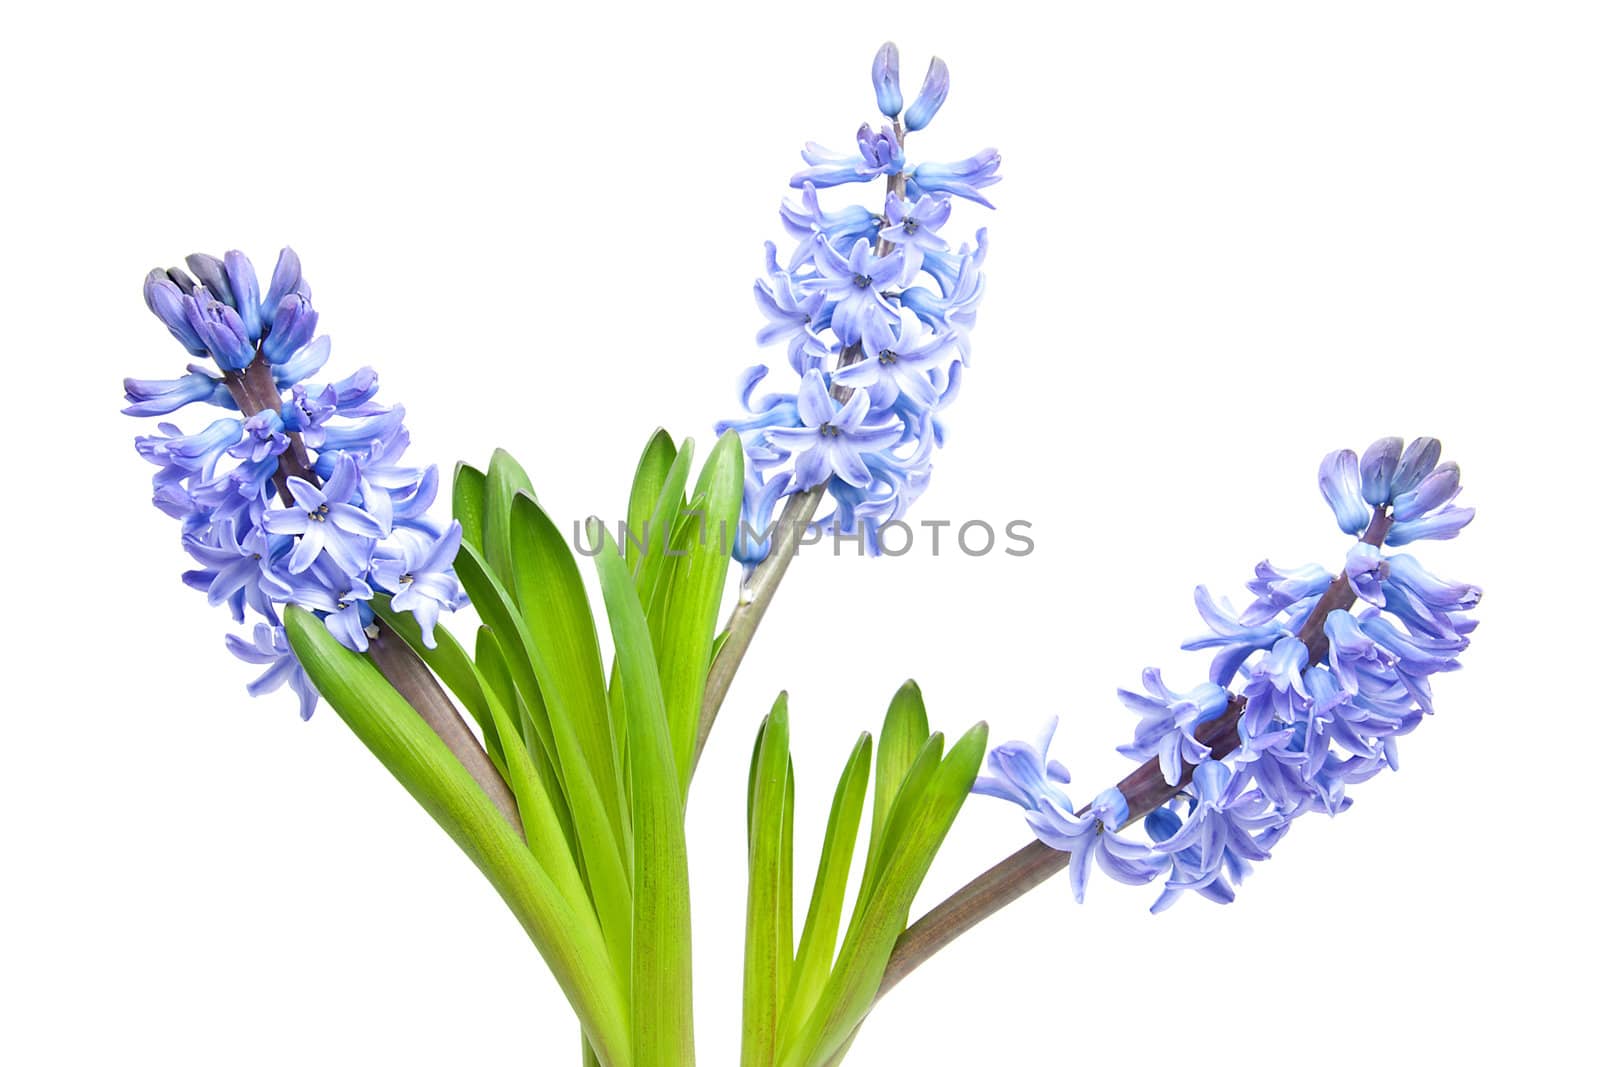 Purple Hyacinth flowers in closeup over white background